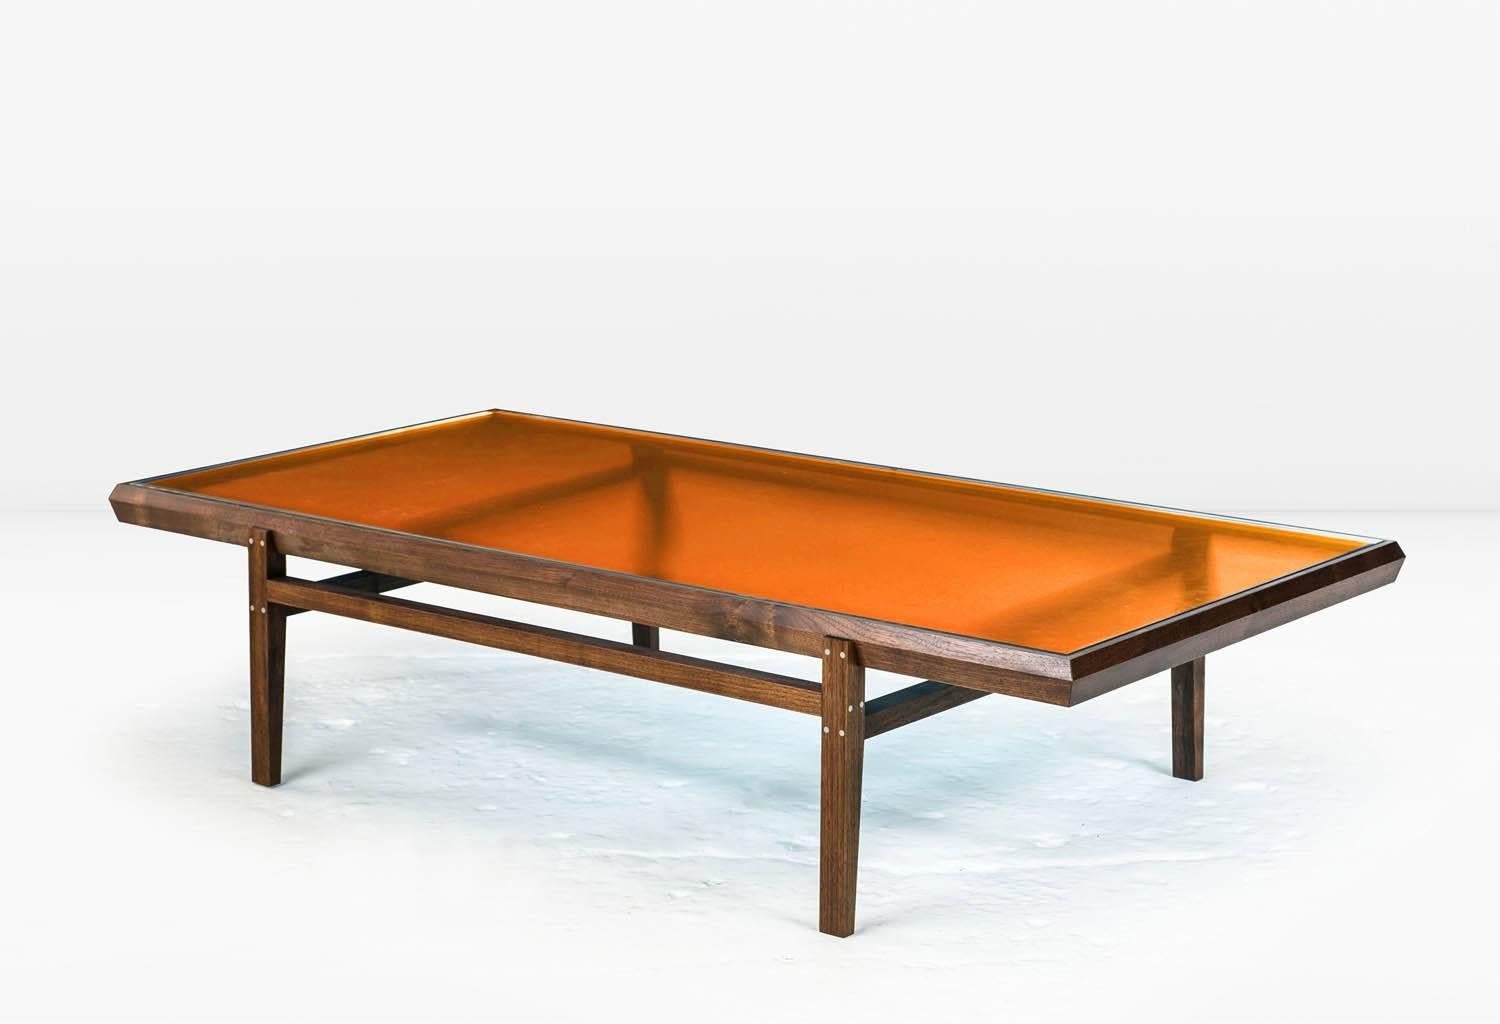 The Pintor coffee table’s solid wood frame with stainless steel inlay is engineered with chamfered edges to provide a simple but worthy setting for the jewel toned, colored glass which forms the tabletop. Shown with solid American black walnut frame